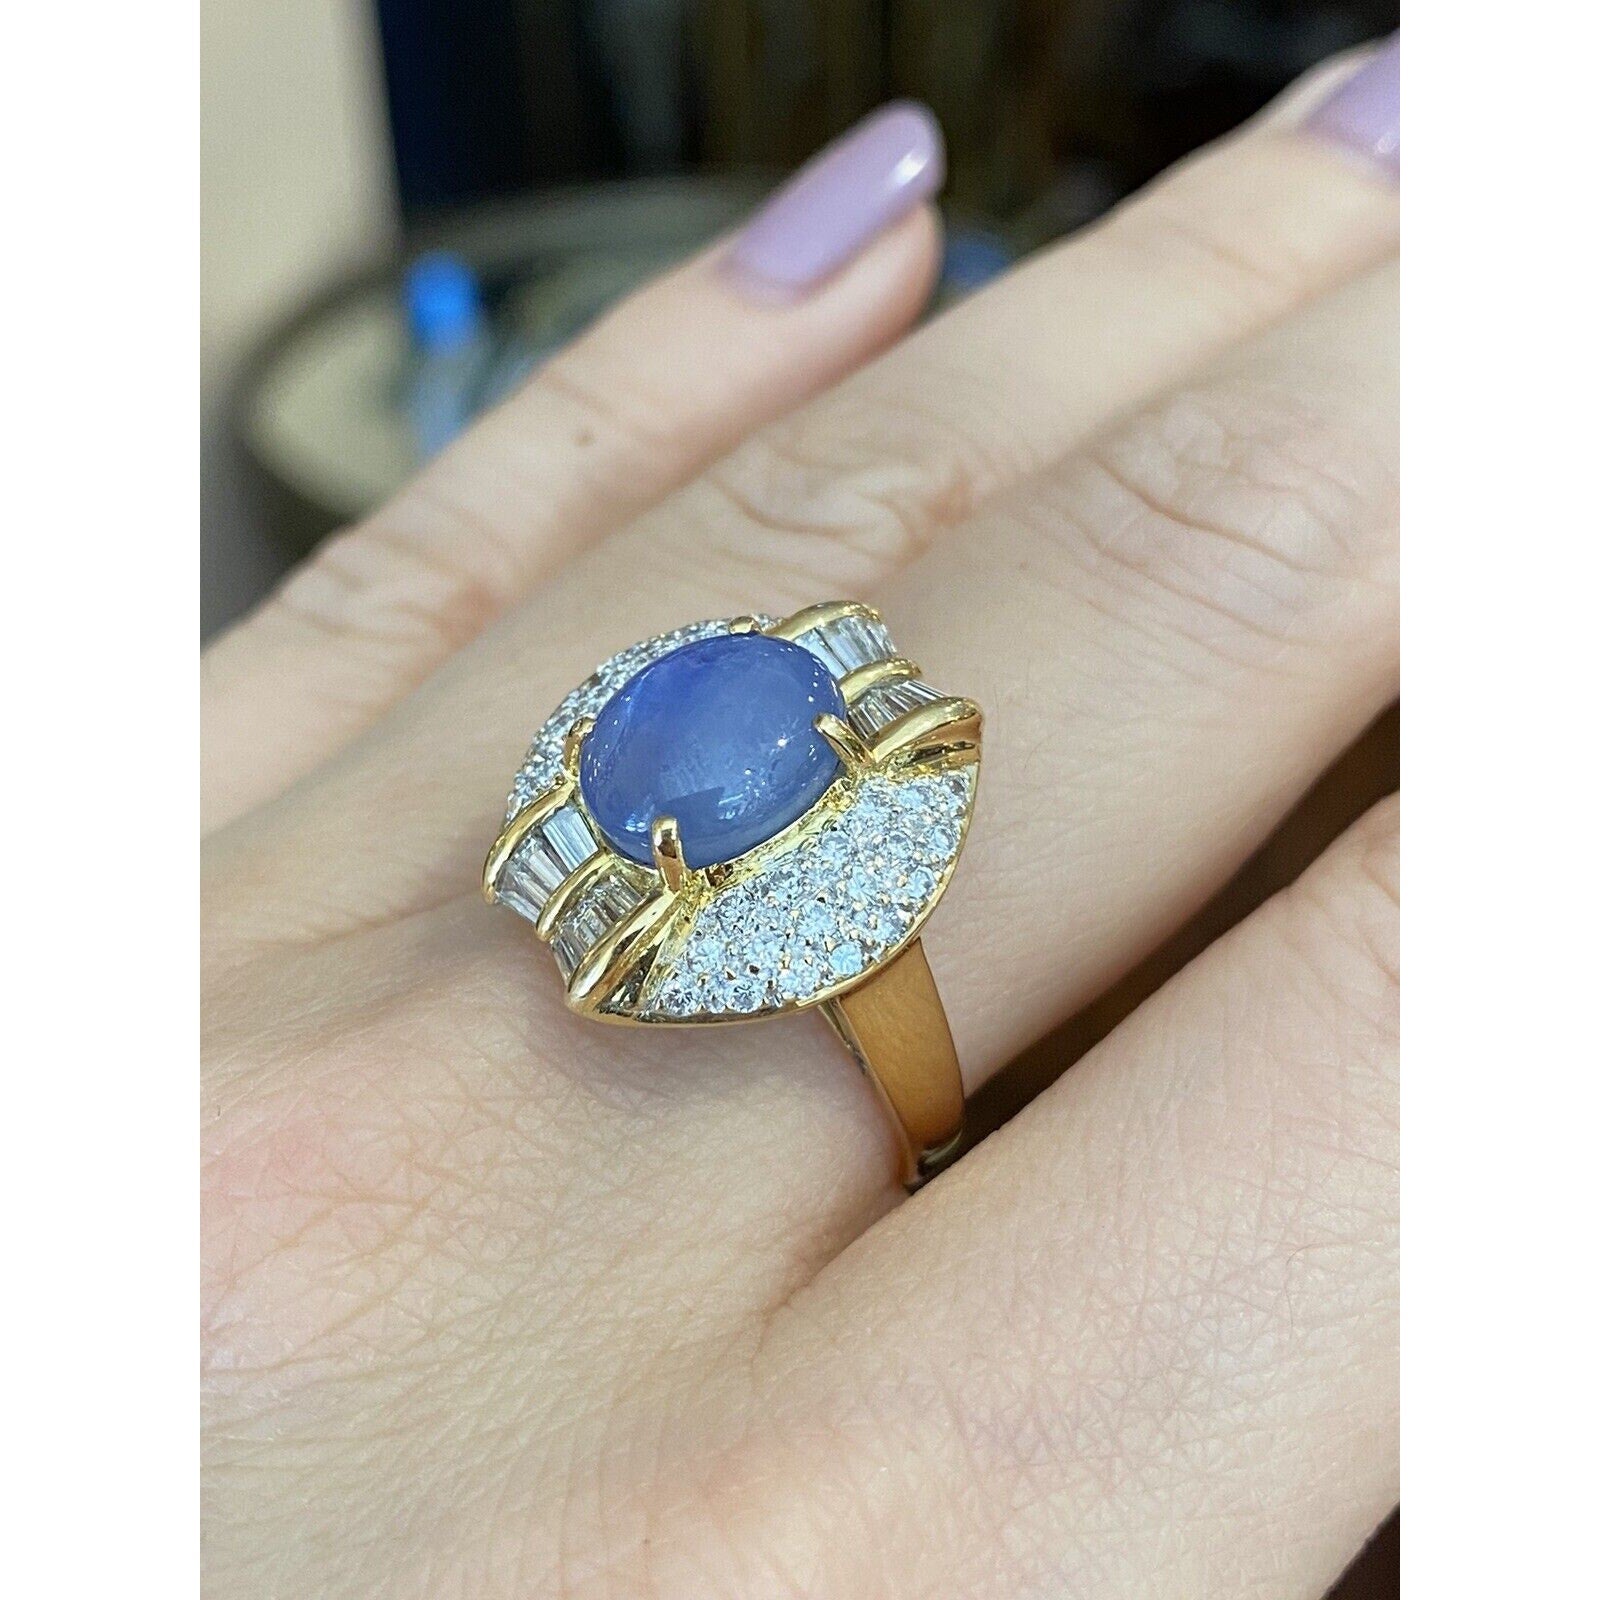 6.24 carat Oval Star Sapphire with Pave Diamonds in 18k Yellow Gold